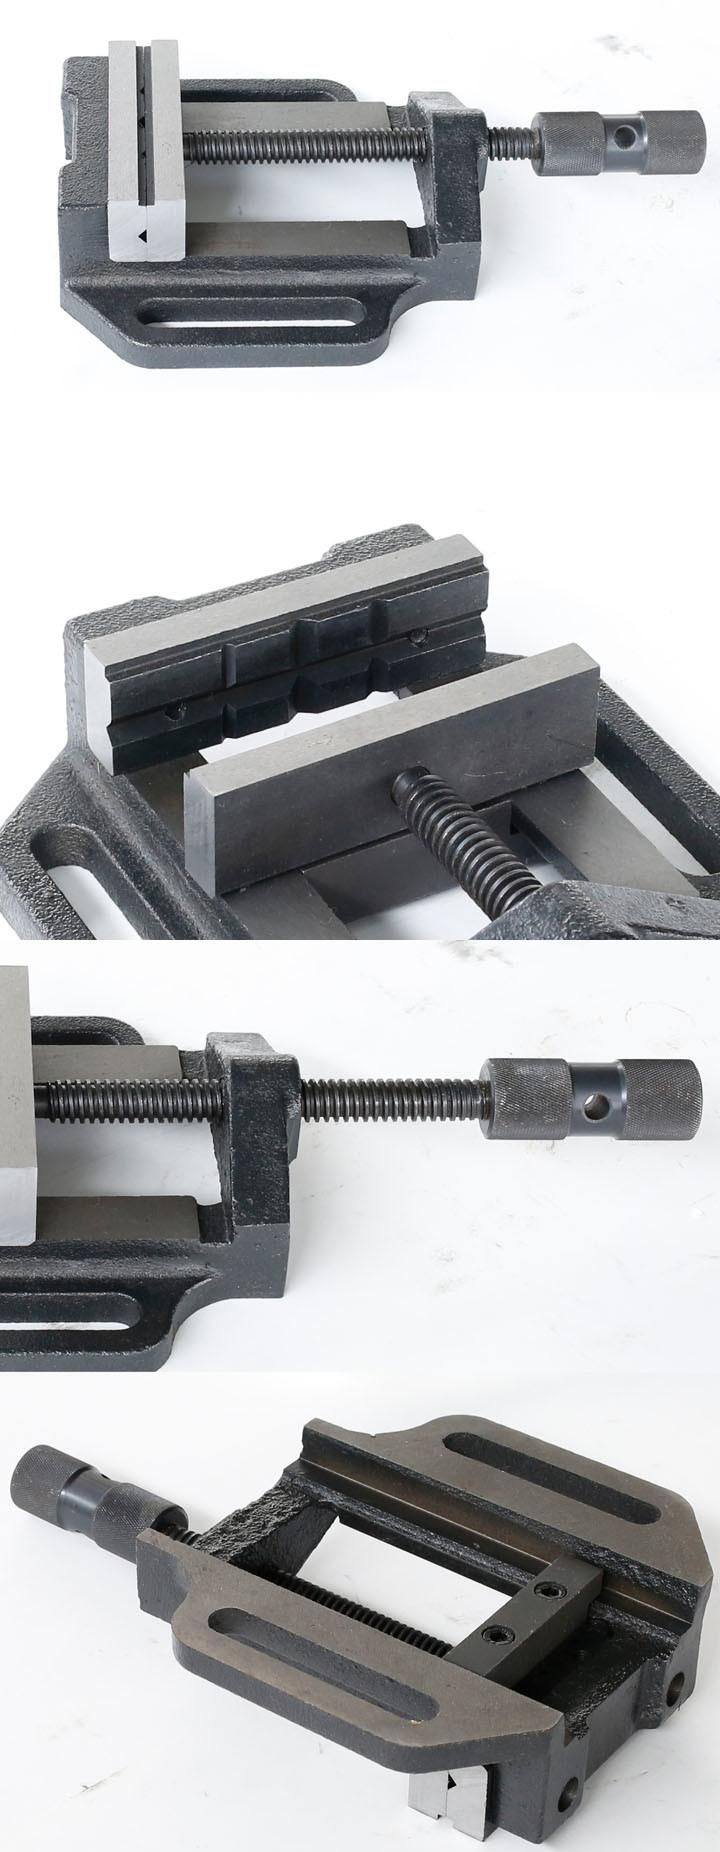 Drill Press Vise for High Precision Drilling and Machining